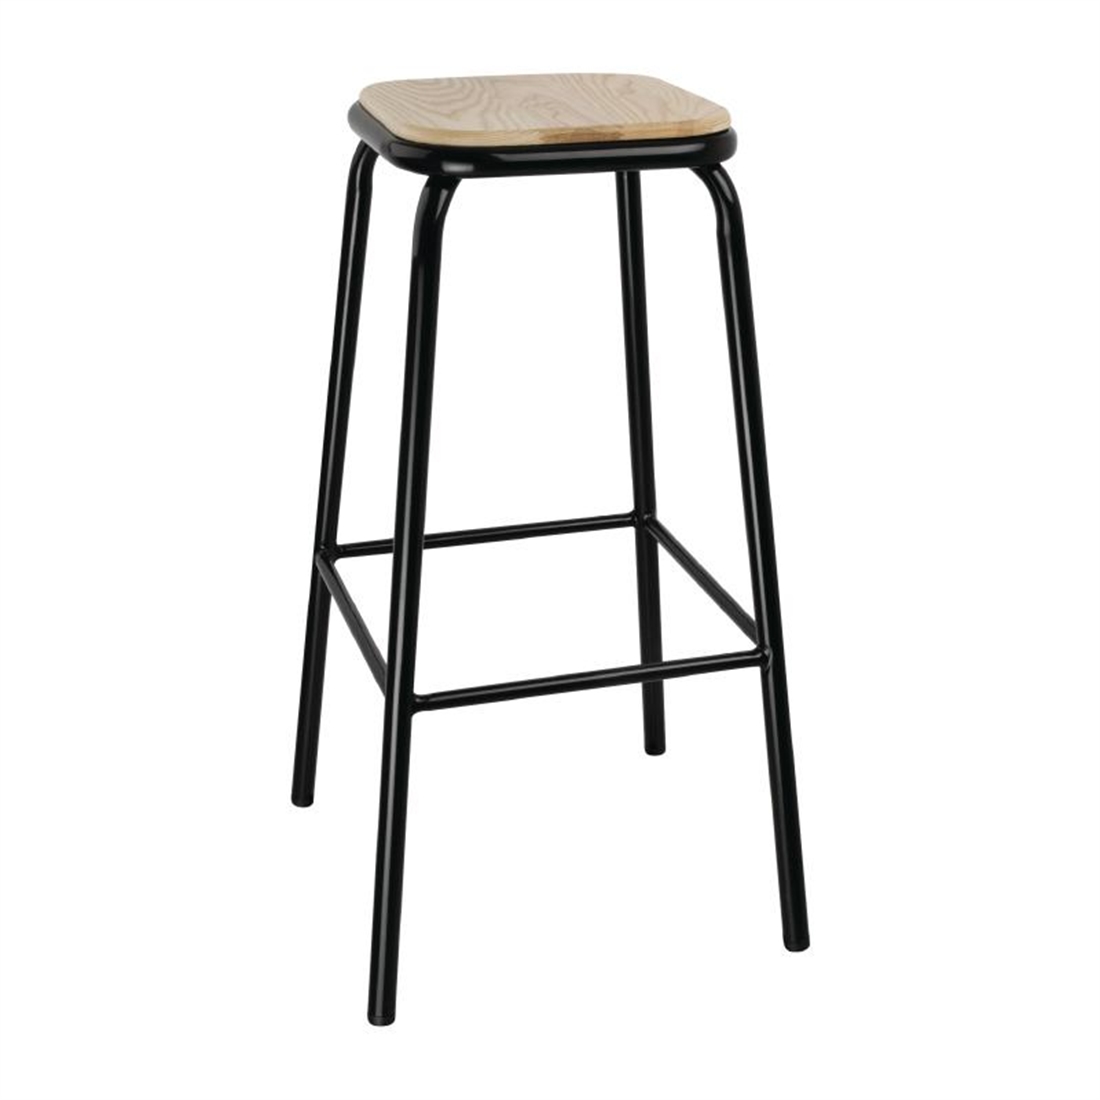 Bolero Black High Barstool with Wooden Seatpad (Pack of 4)